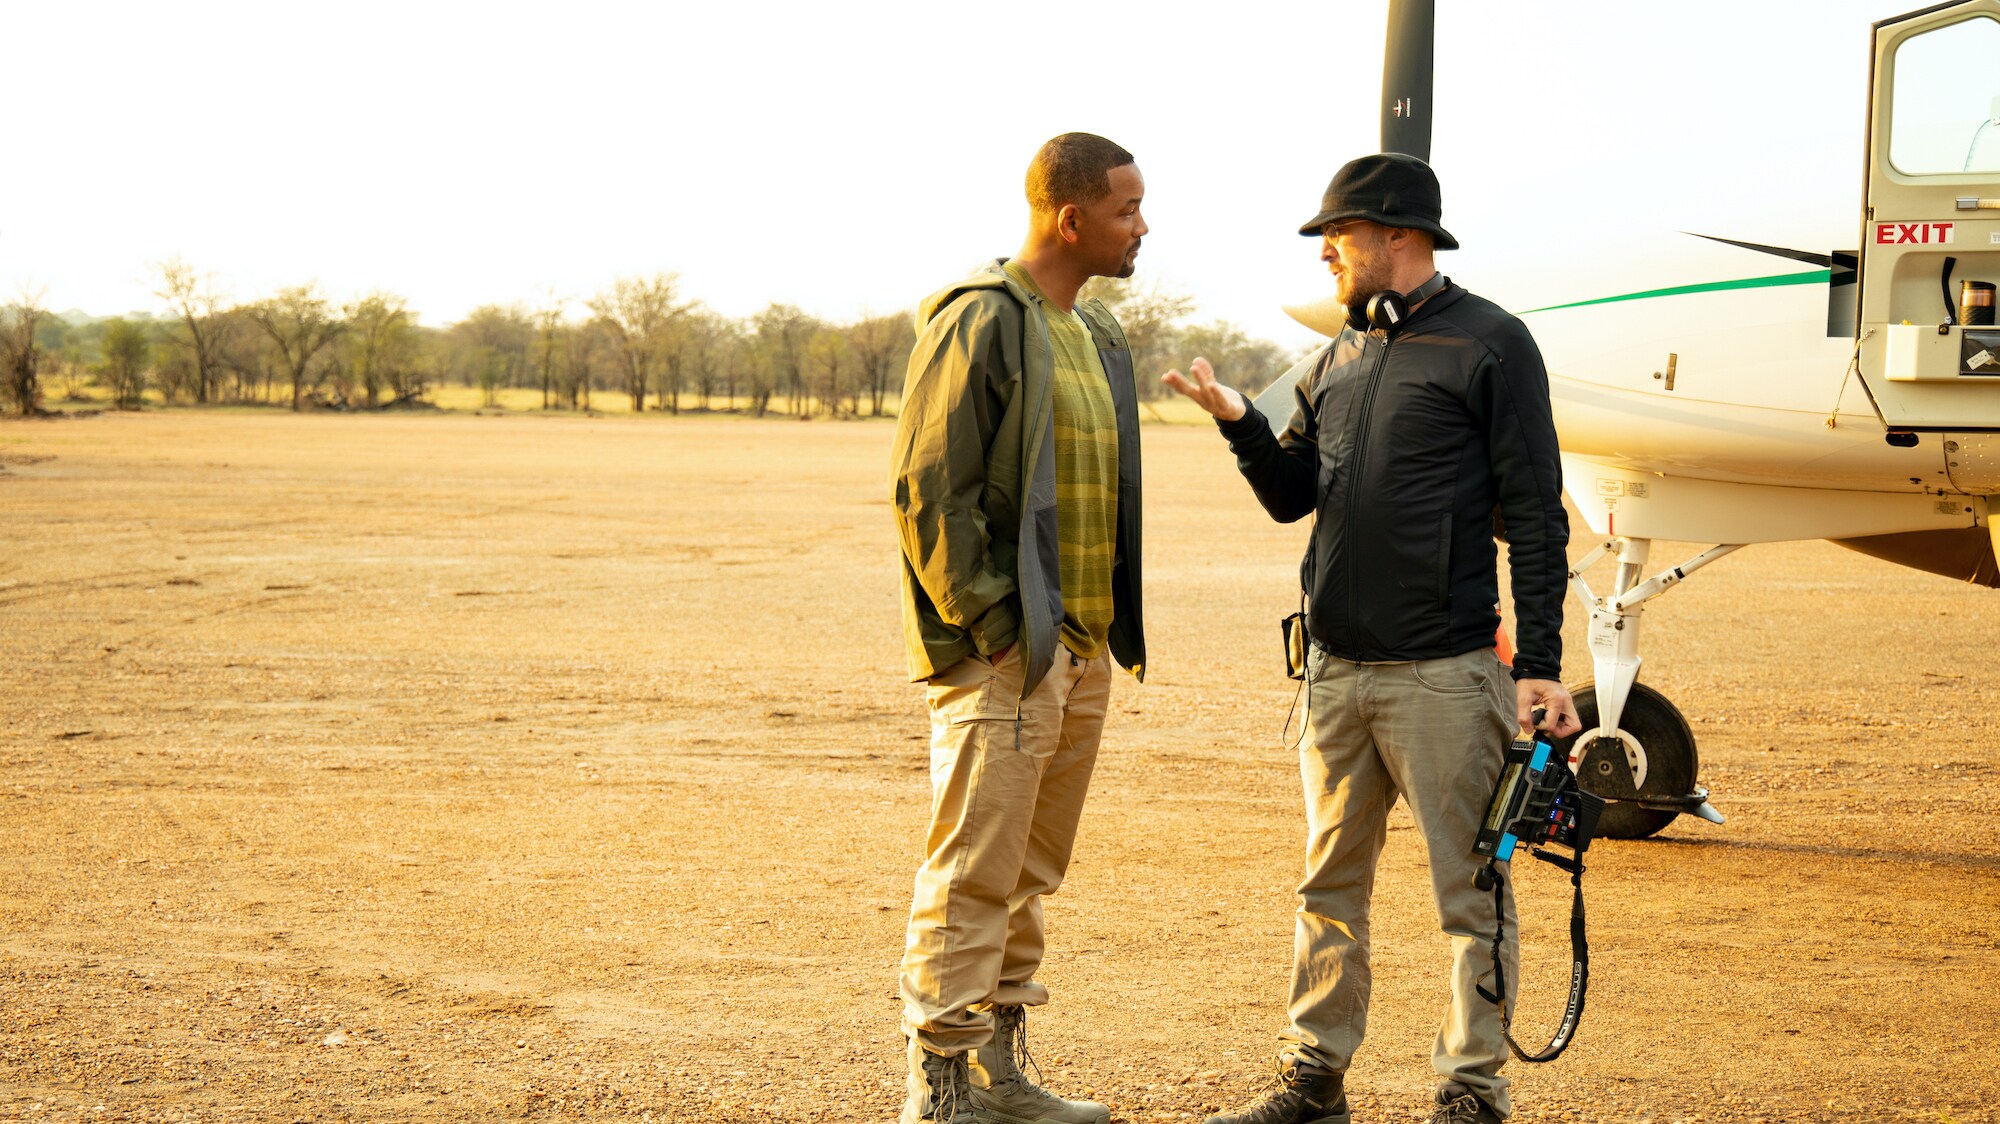 Will Smith, left, and Executive Producer Darren Aronofsky talk during their travels to the Serengeti to film the migrations.  (National Geographic for Disney+/Kyle Christy)